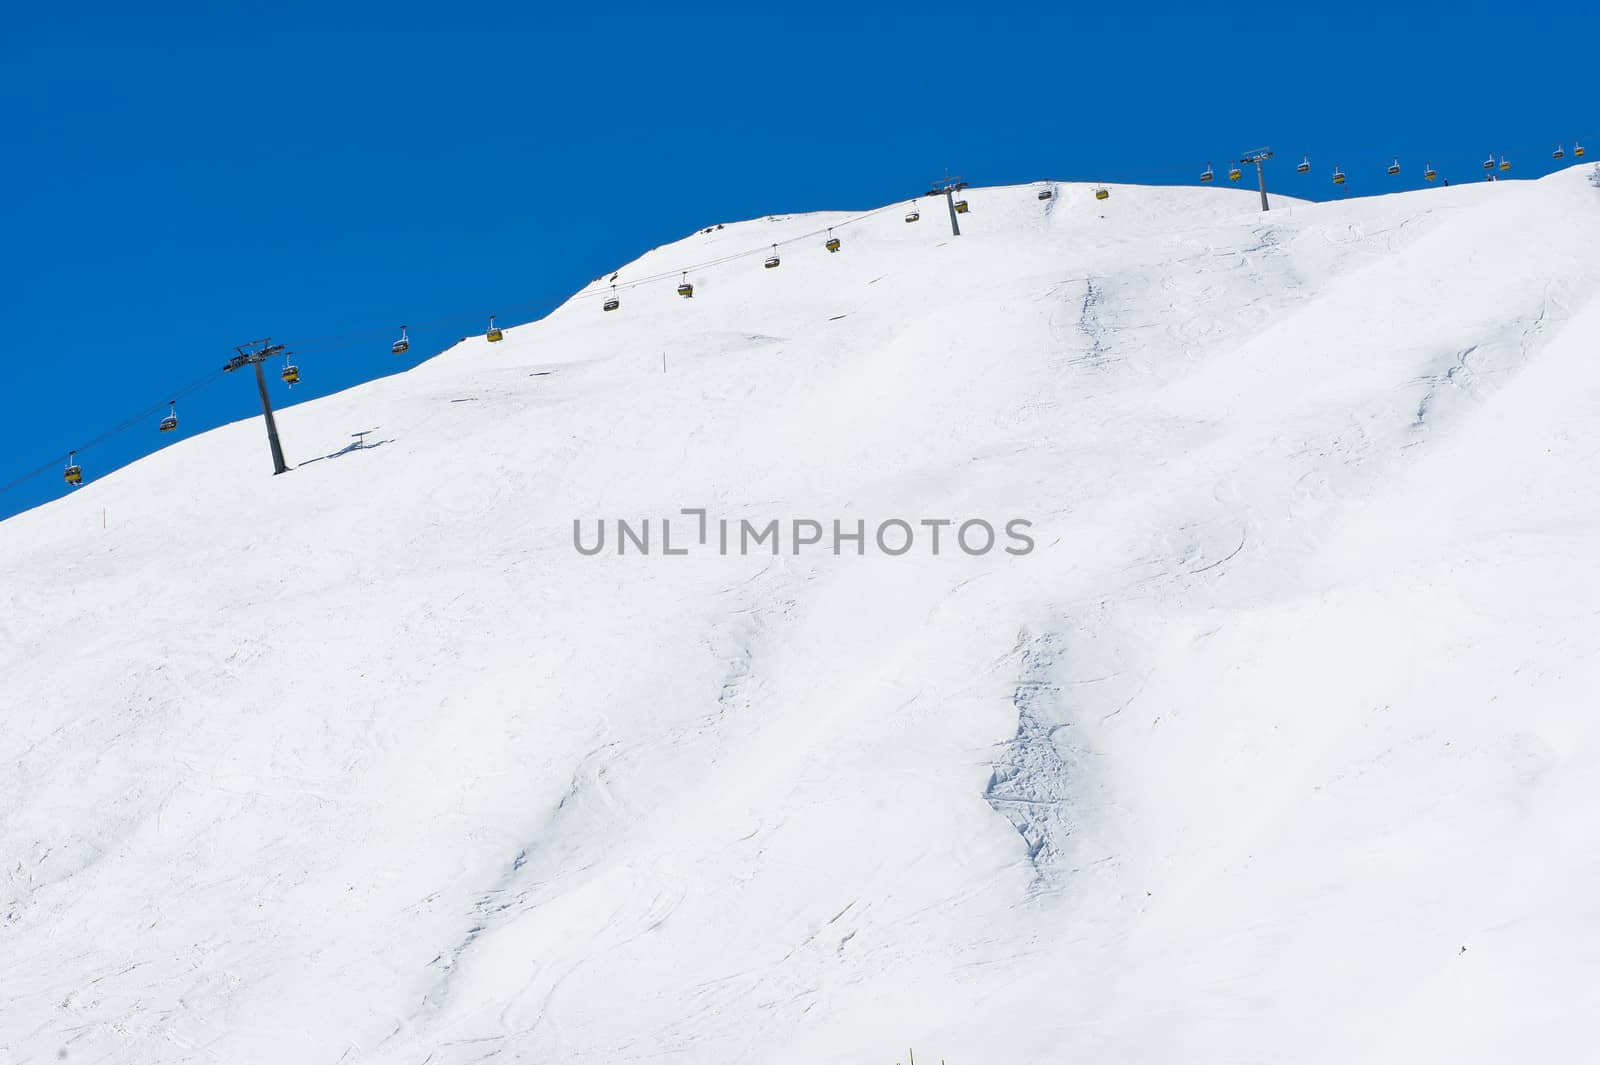 Chairlift along Ski Slope at a clear winters day in Saint Moritz, Switzerland